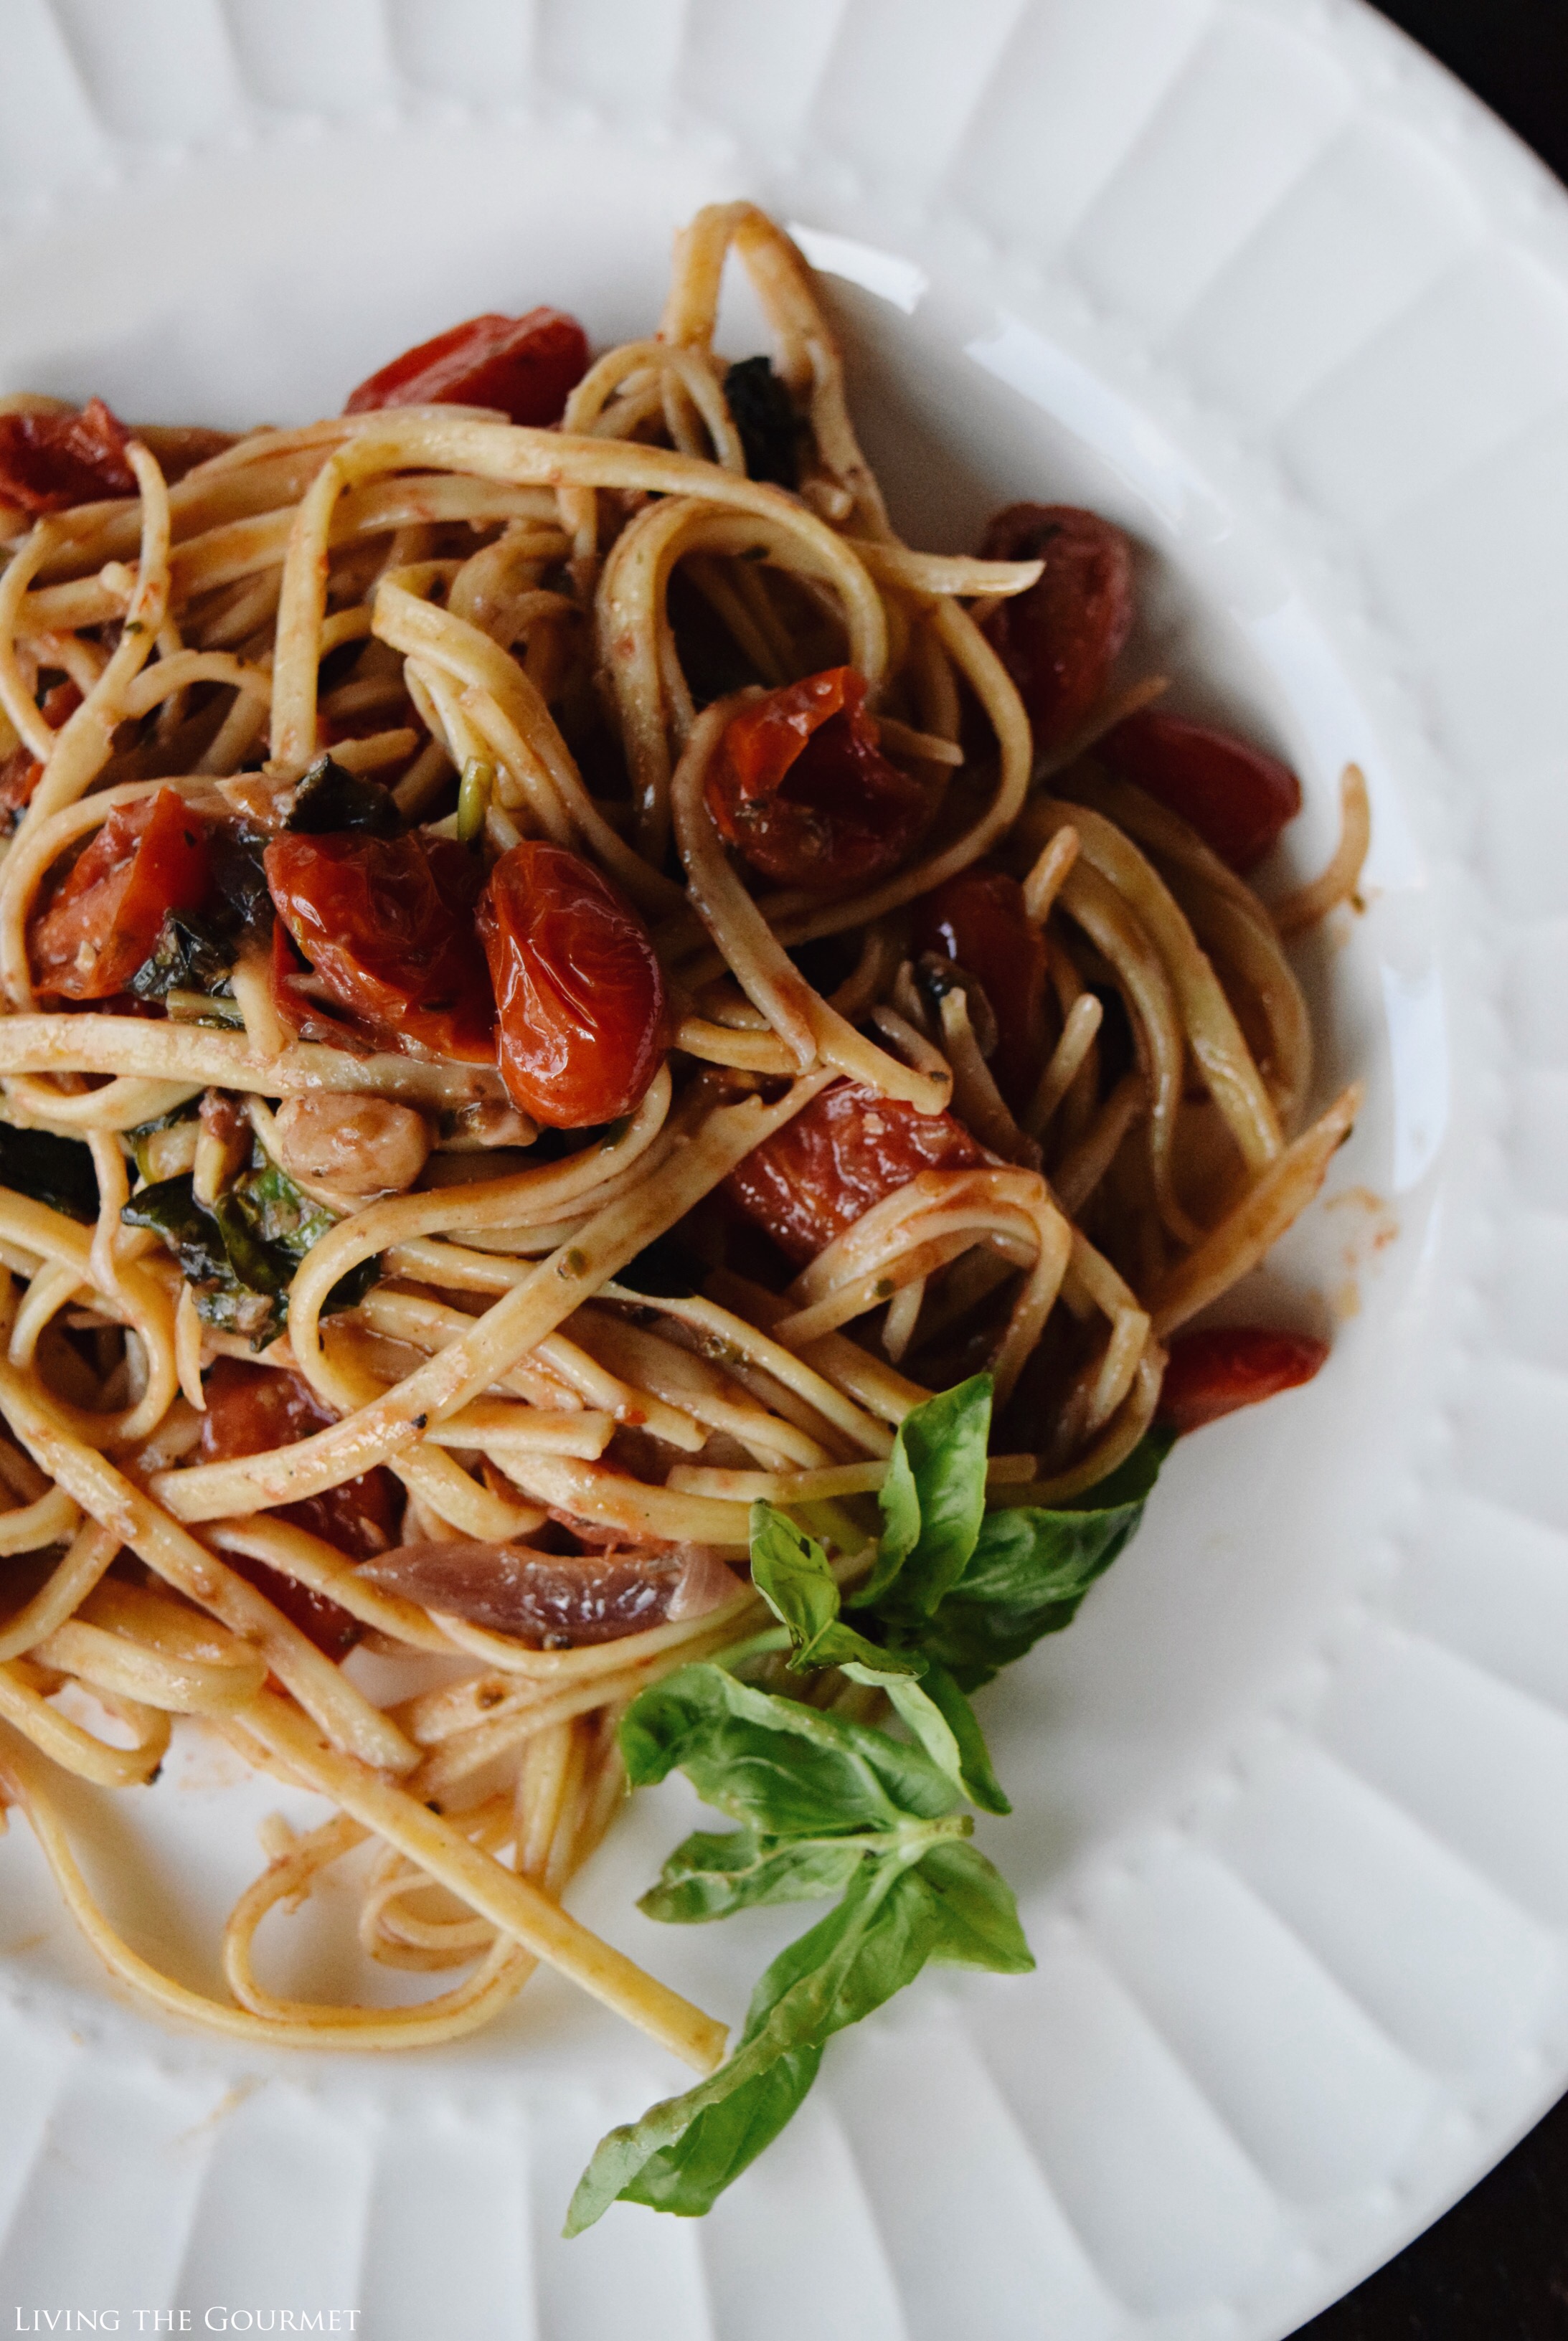 Living the Gourmet: Truffle Linguini with Fresh Tomatoes, Anchovies and Basil